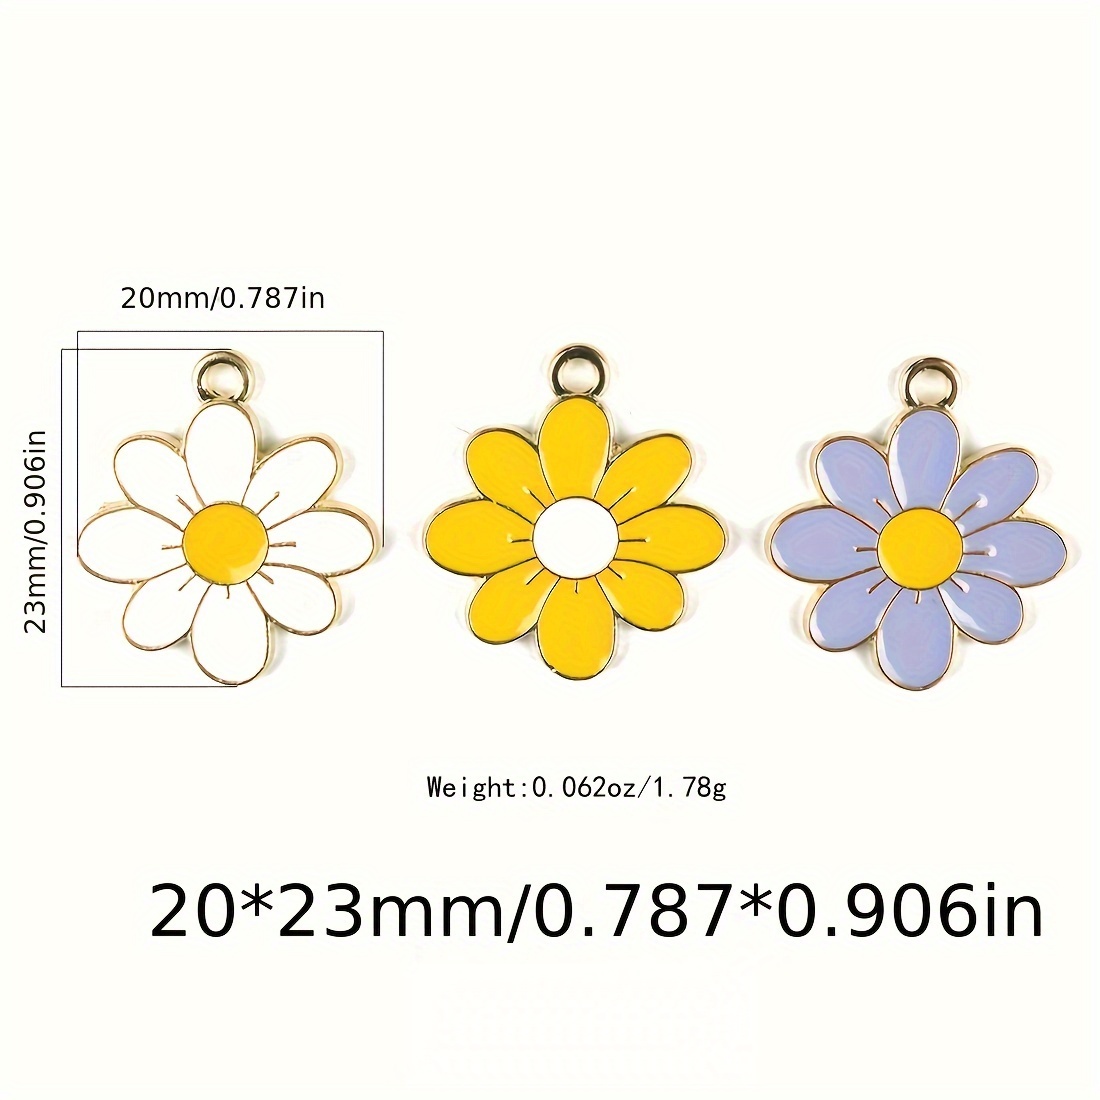 10pcs Digital 5-Character Round Card 5-Character Playing Card DIY Alloy Dropping Oil Enamel Number Charms for Jewelry Accessories Hair Accessories